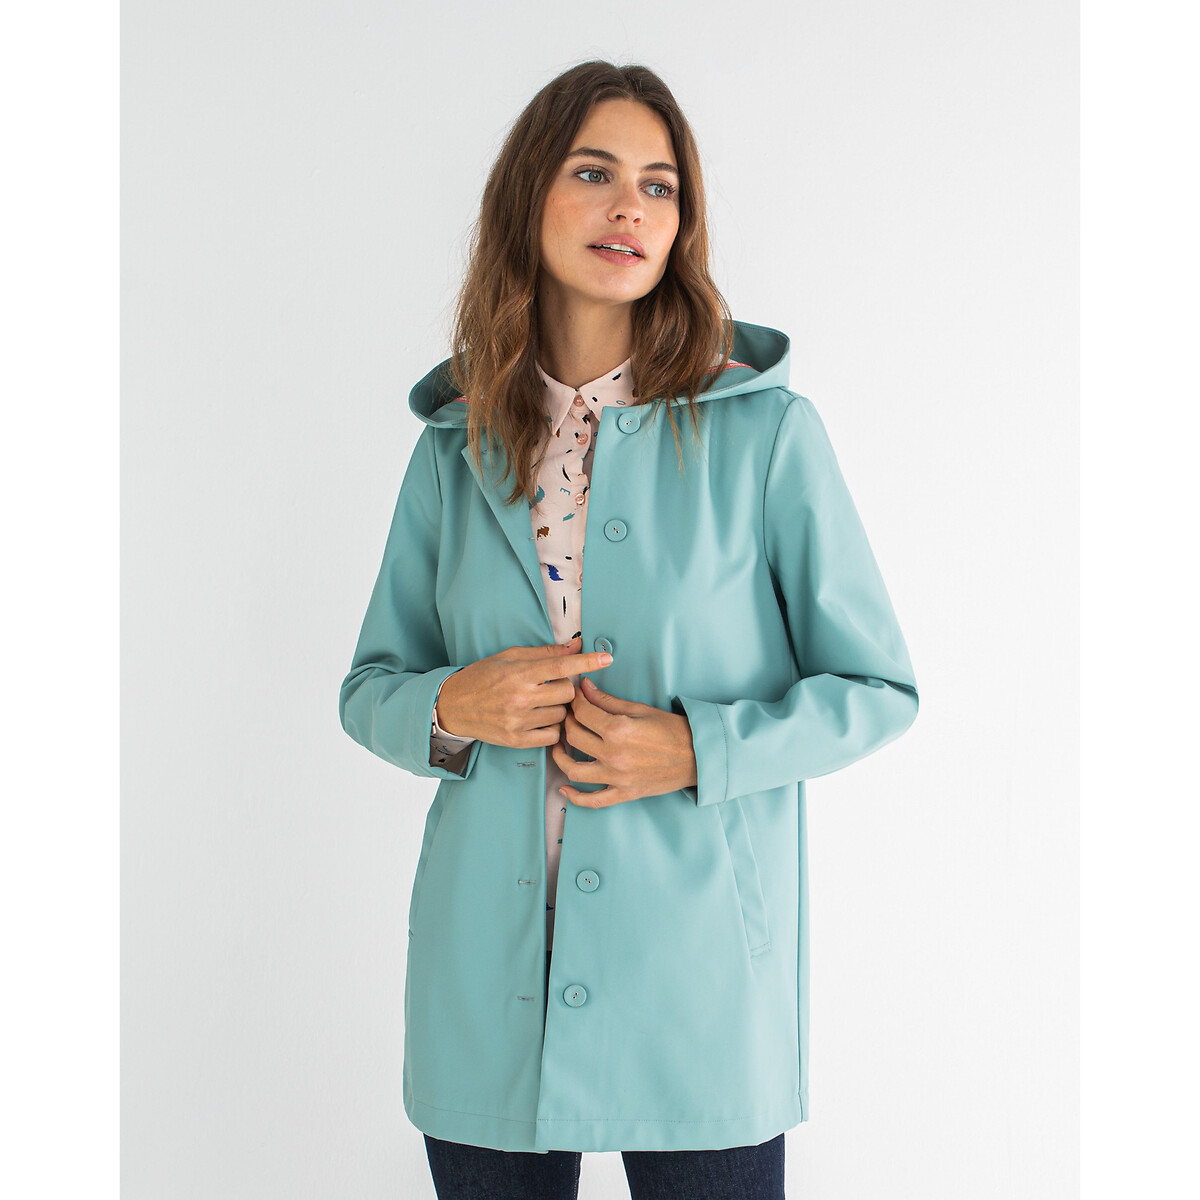 Short buttoned hooded parka, blue/green, Icode | La Redoute